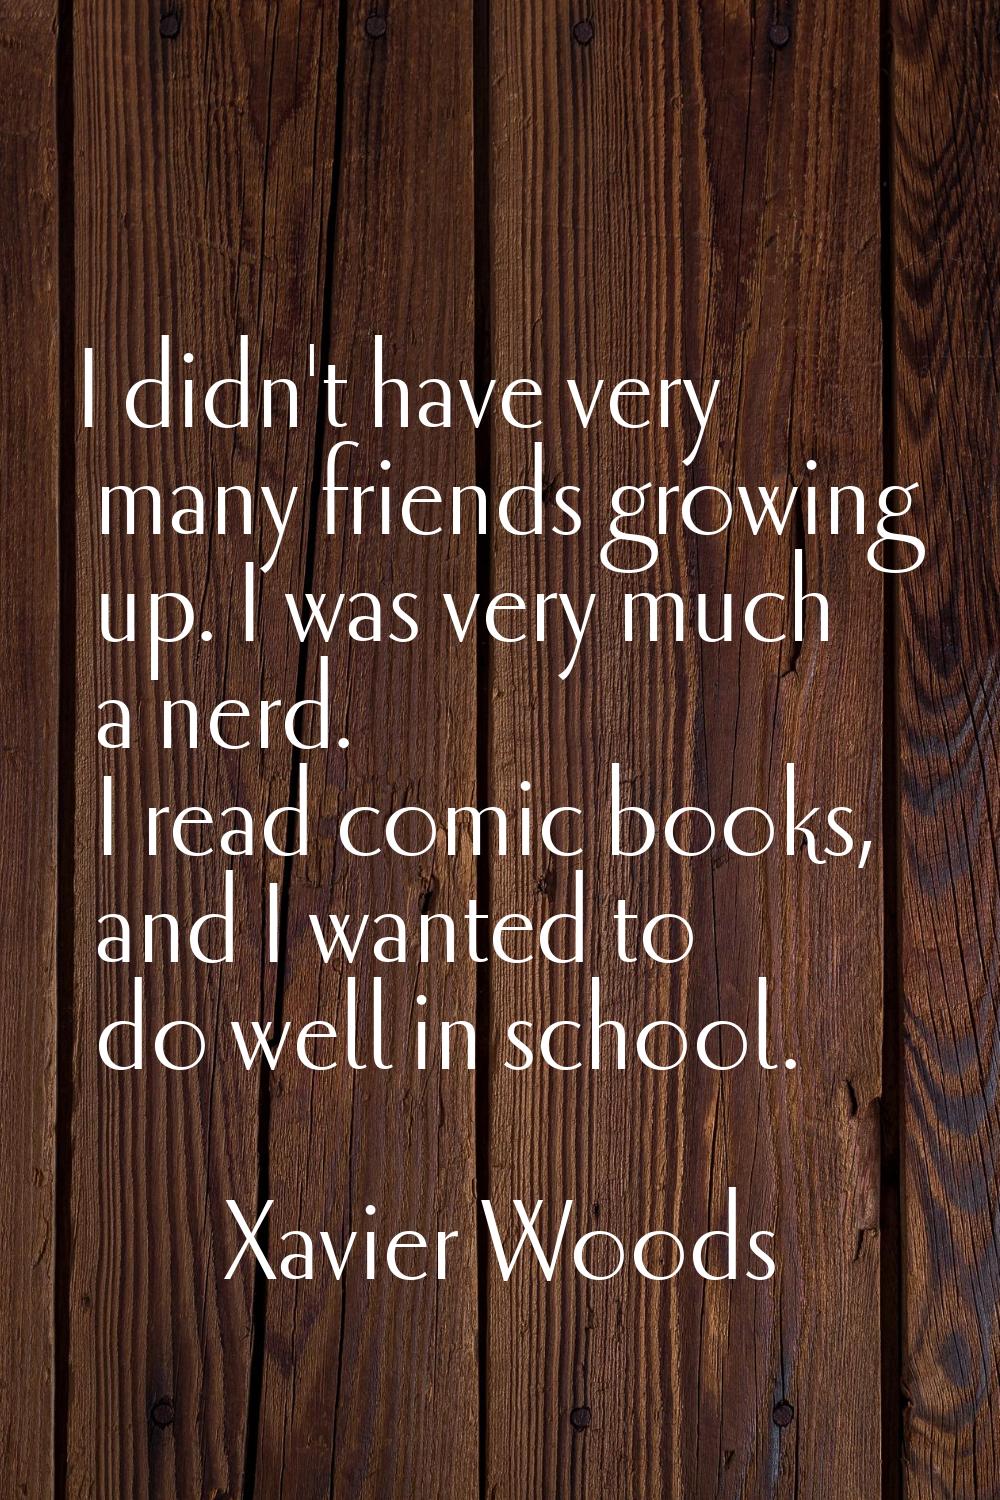 I didn't have very many friends growing up. I was very much a nerd. I read comic books, and I wante